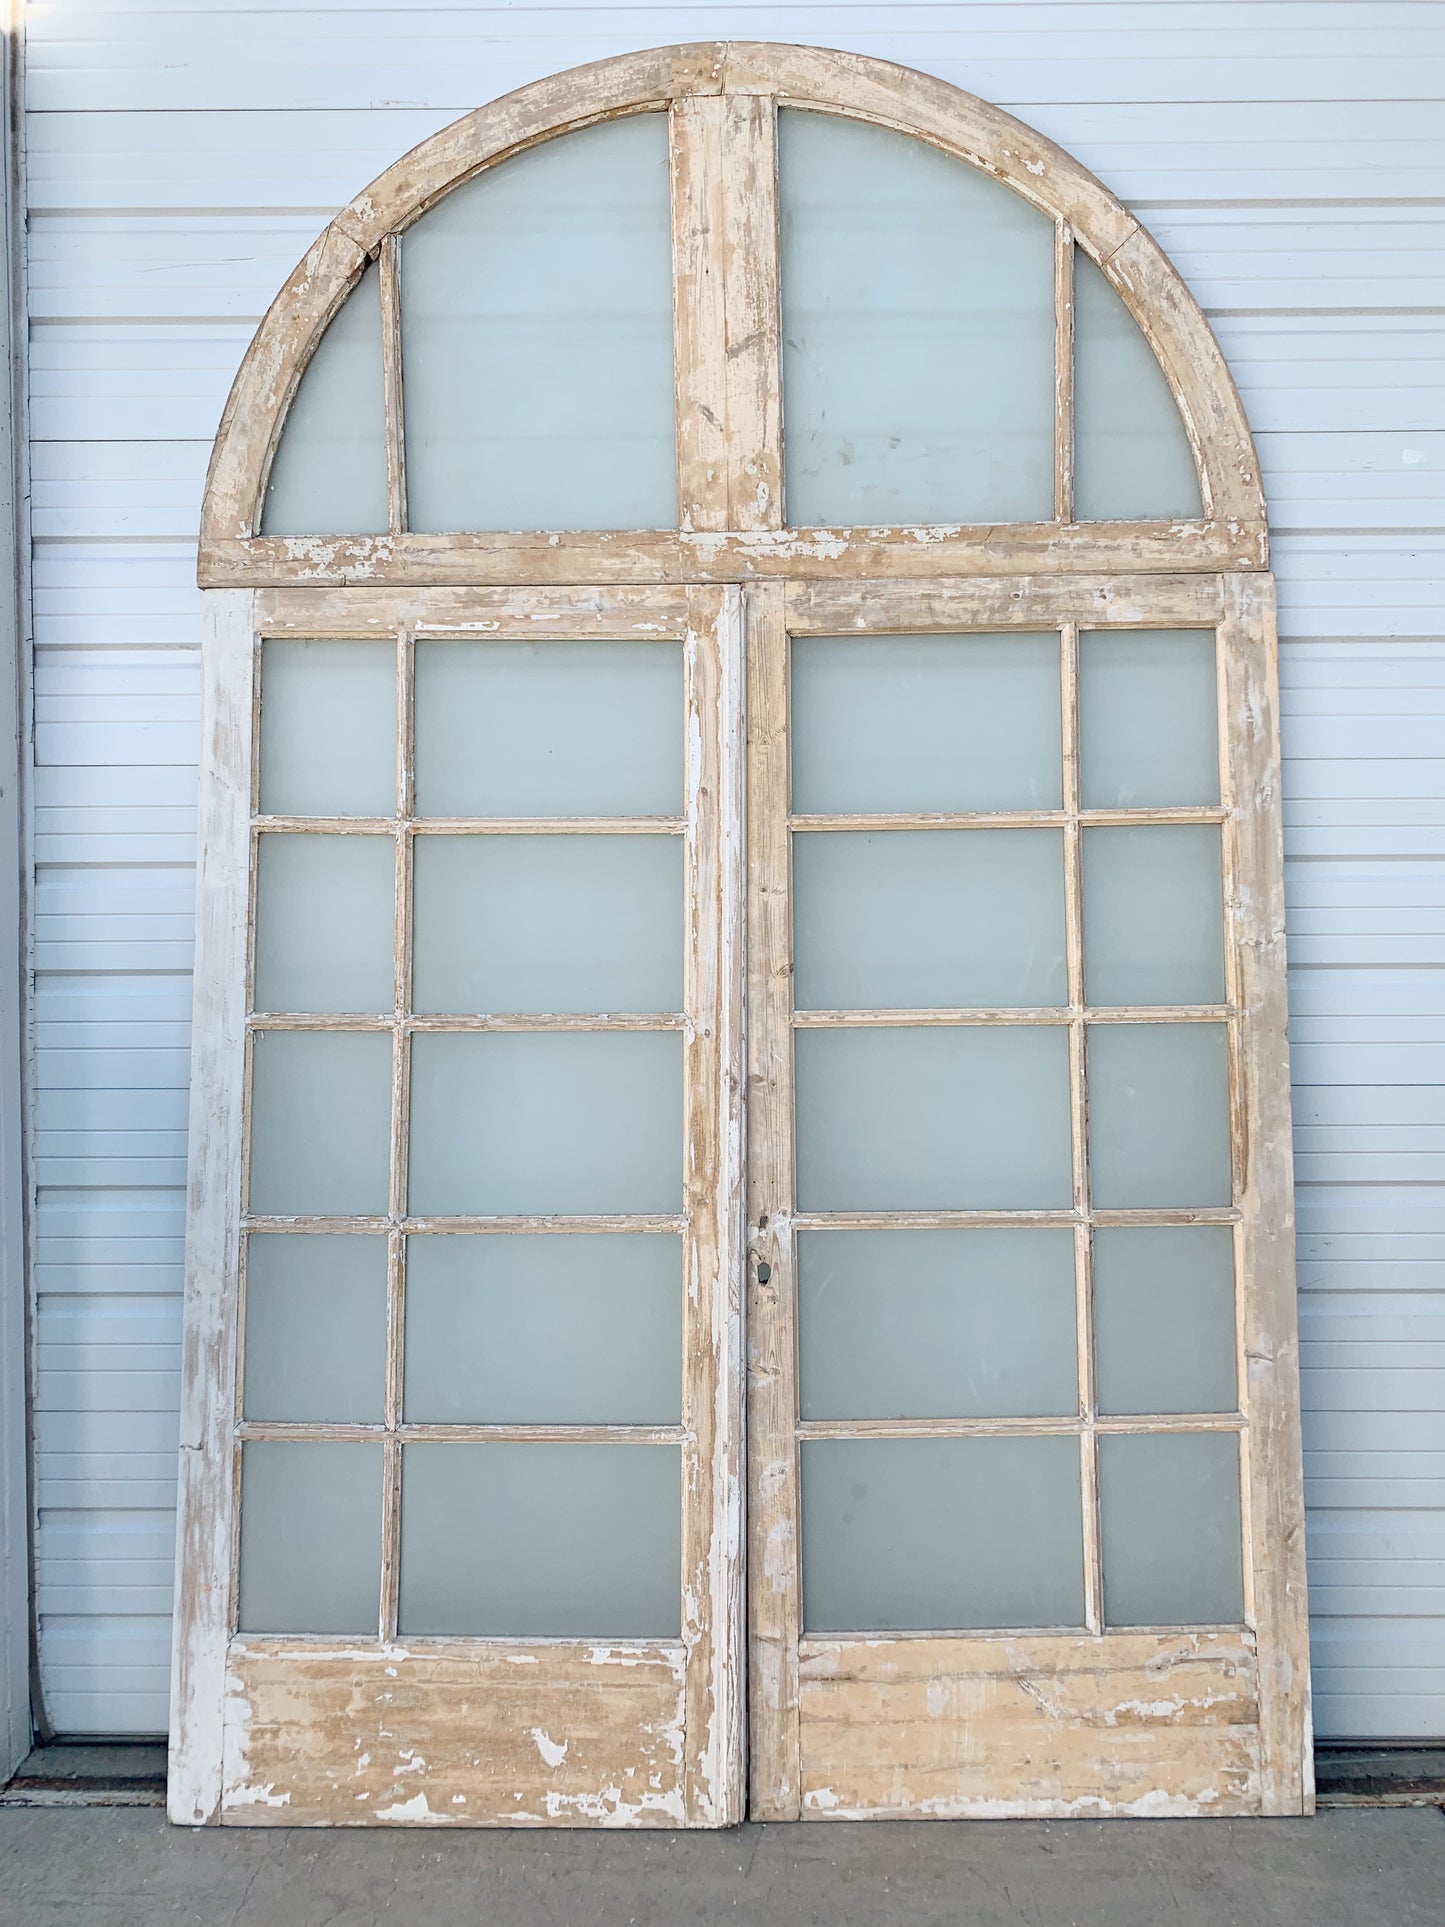 Pair of 10 Lite Obscured Glass French Antique Doors with Half-Round Transom